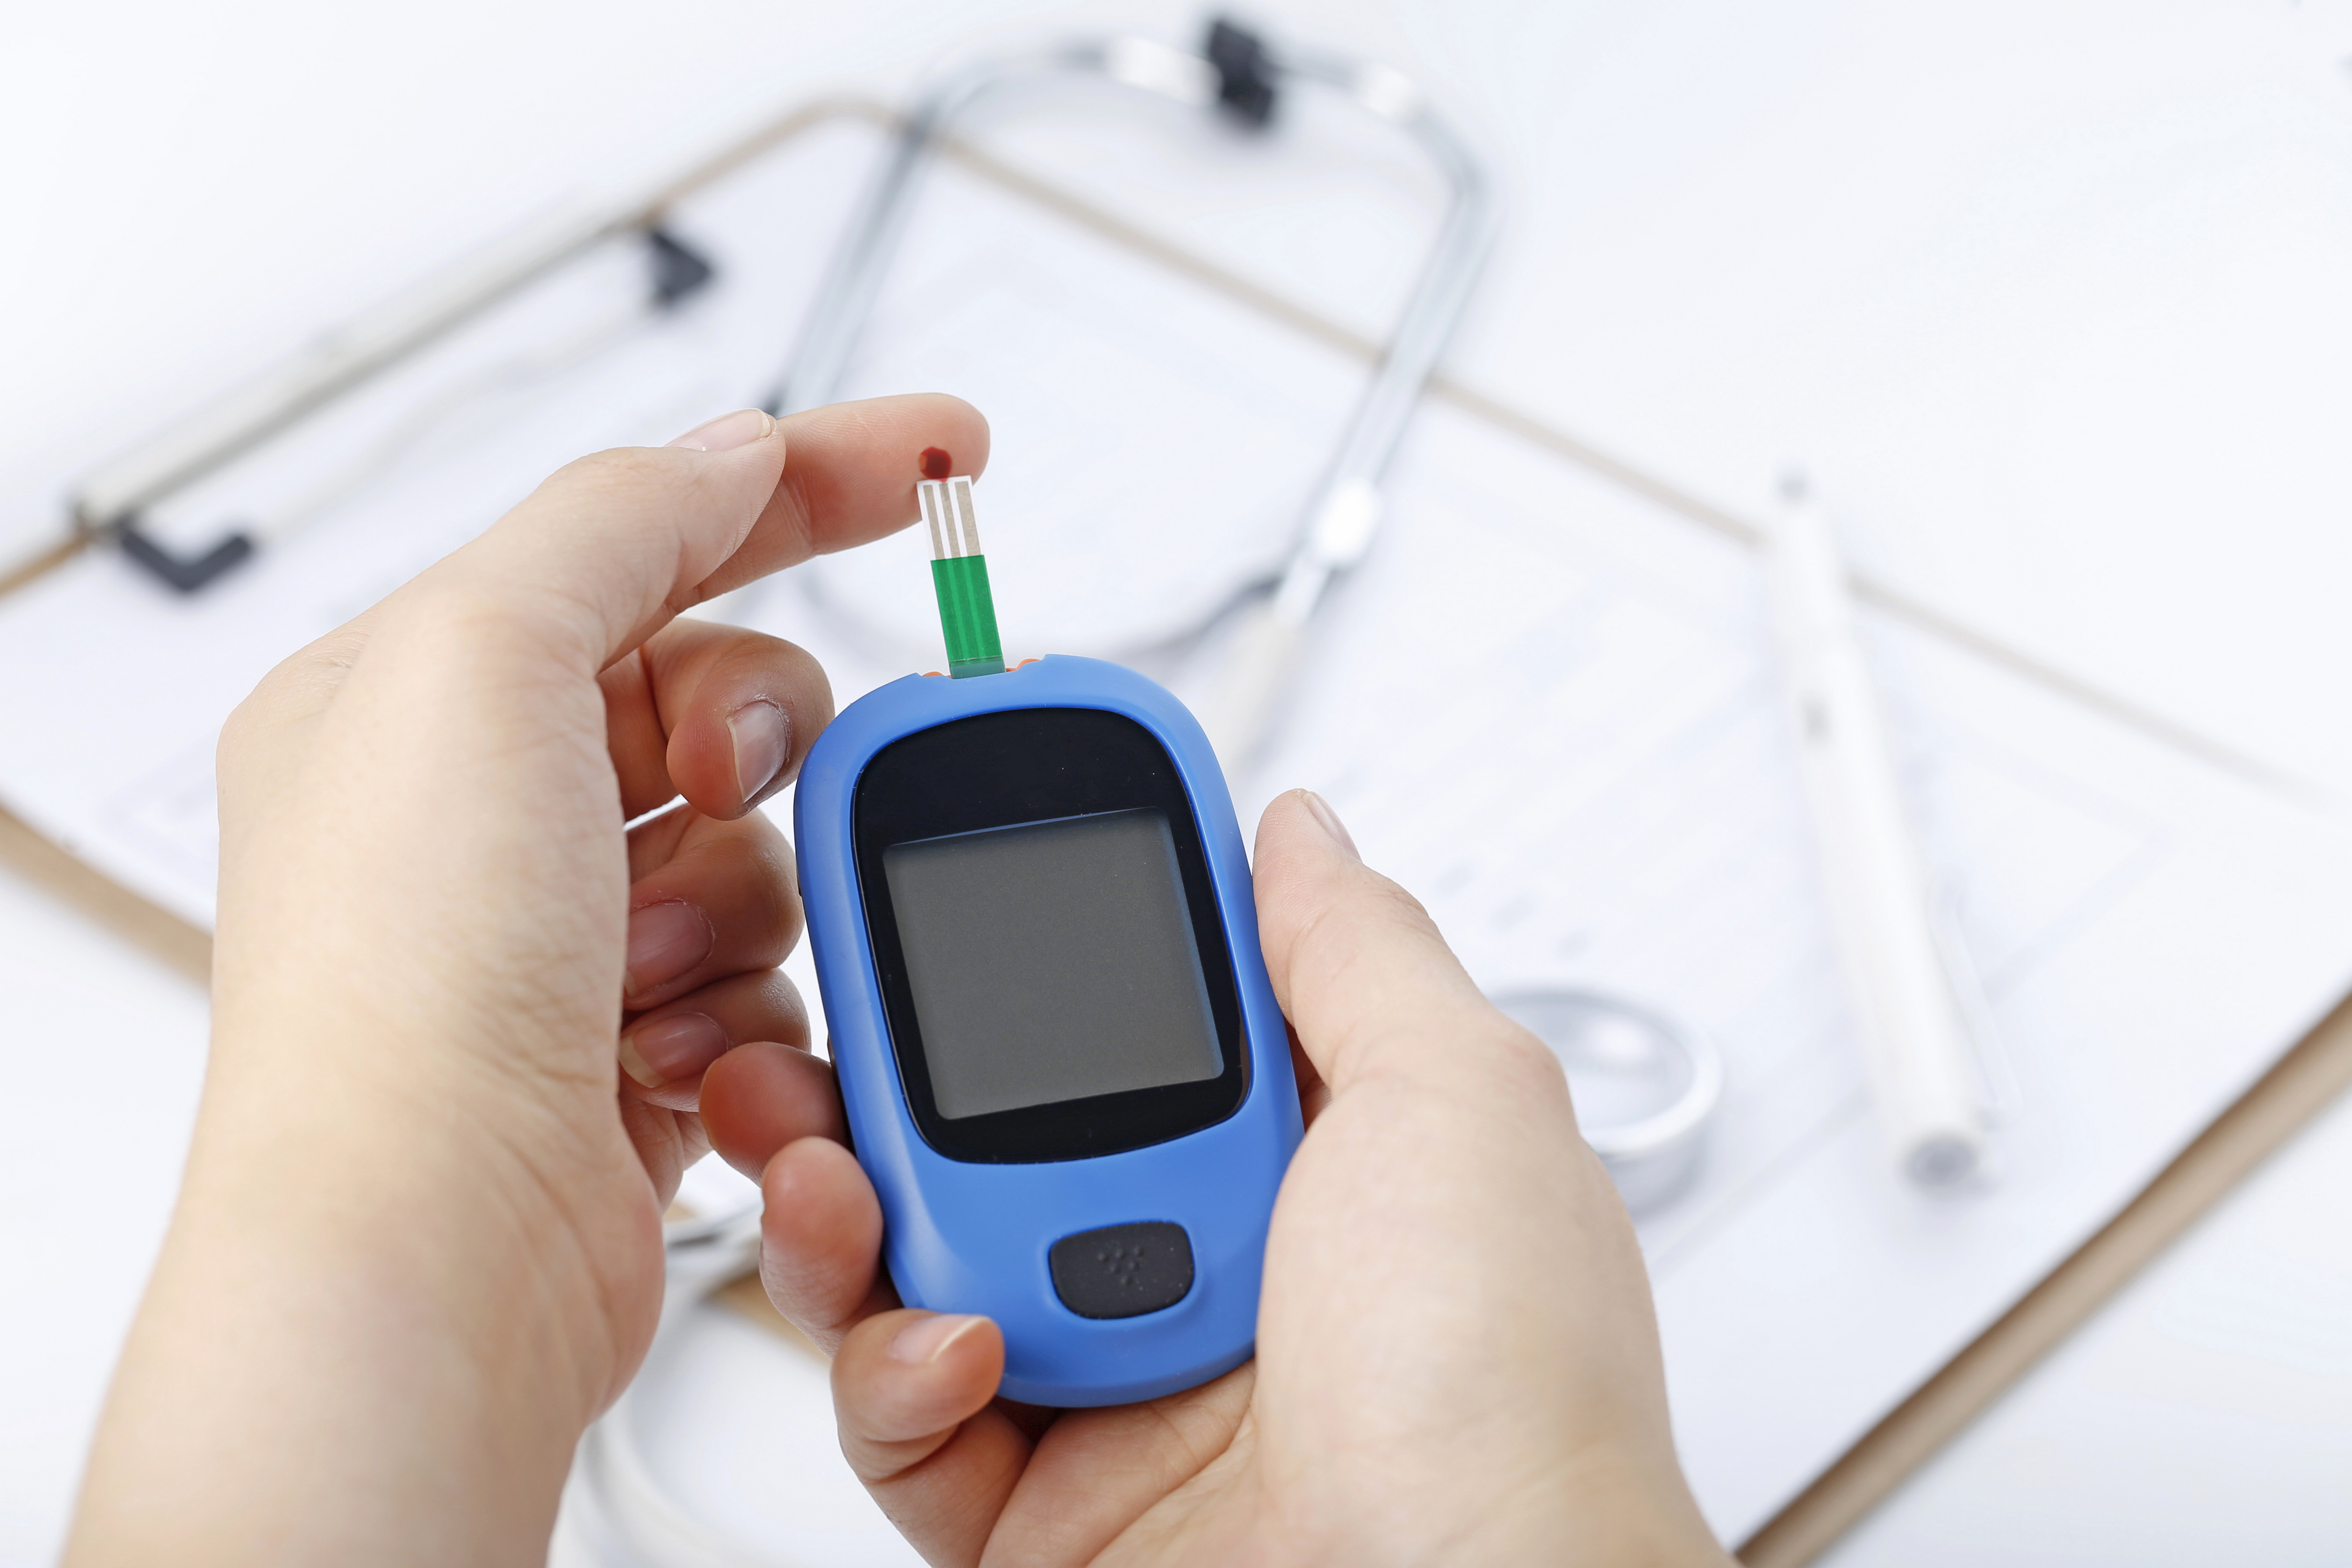 hand-holding-a-blood-glucose-meter-measuring-blood-sugar-the-background-is-a-stethoscope-and-chart-file.jpg